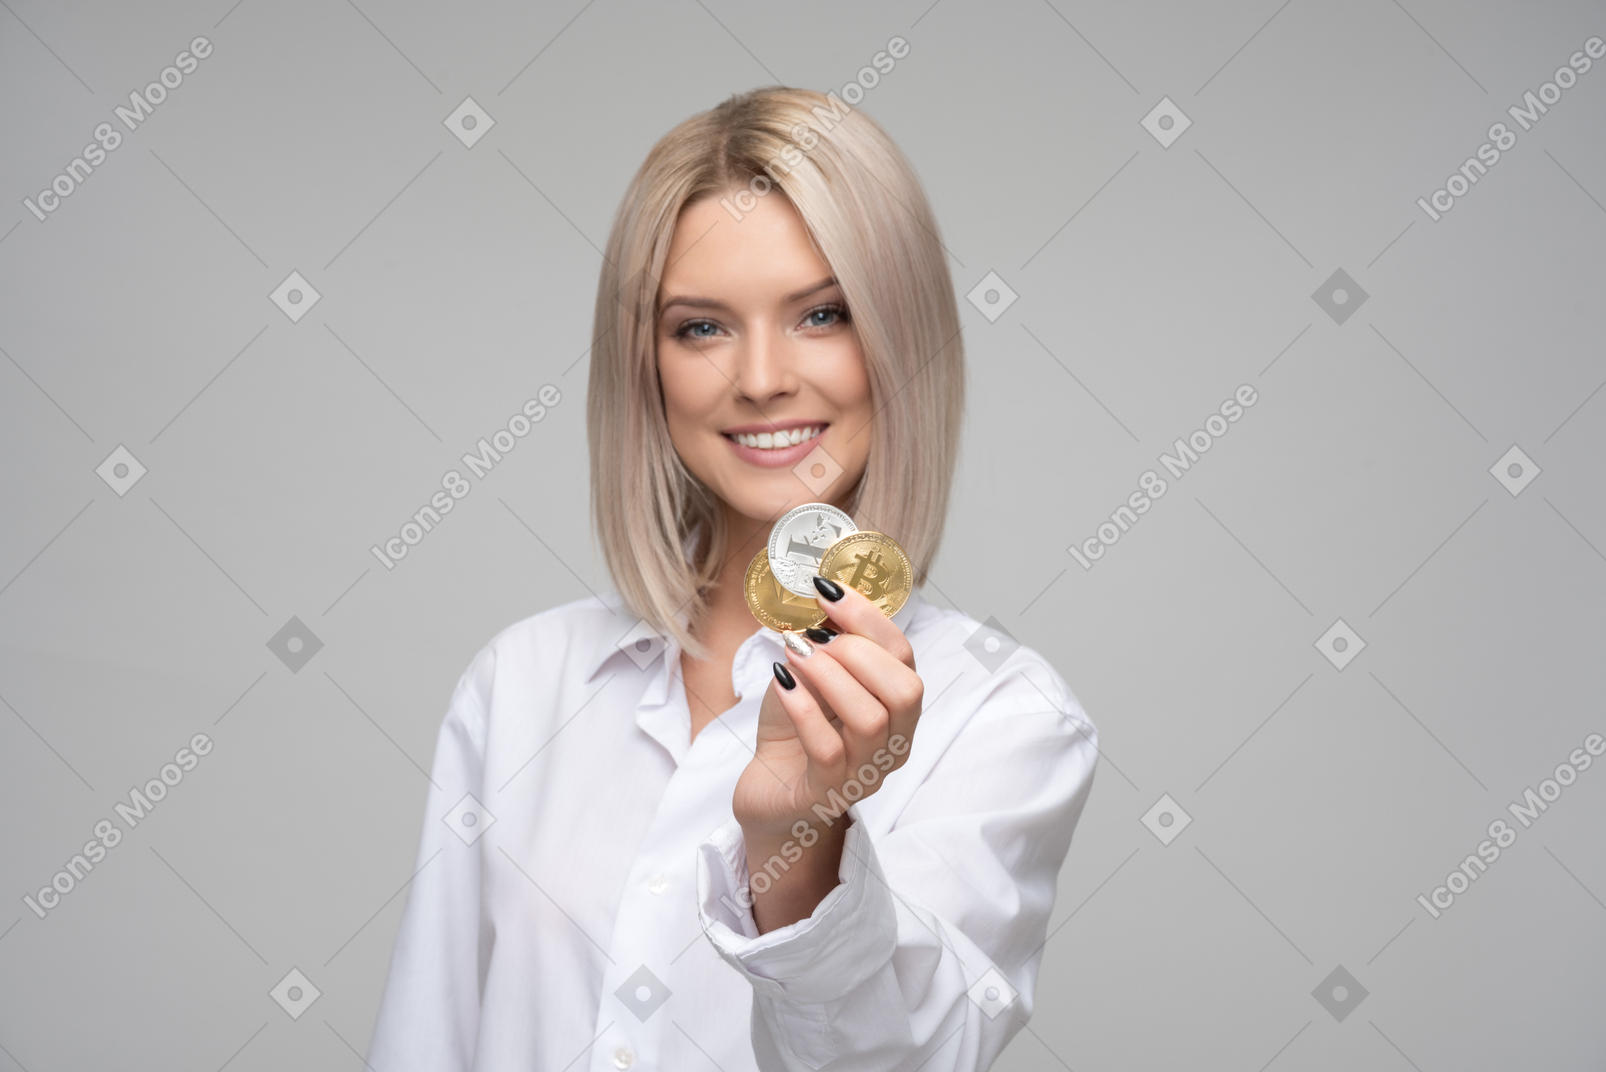 Holding cryptocoins and smiling